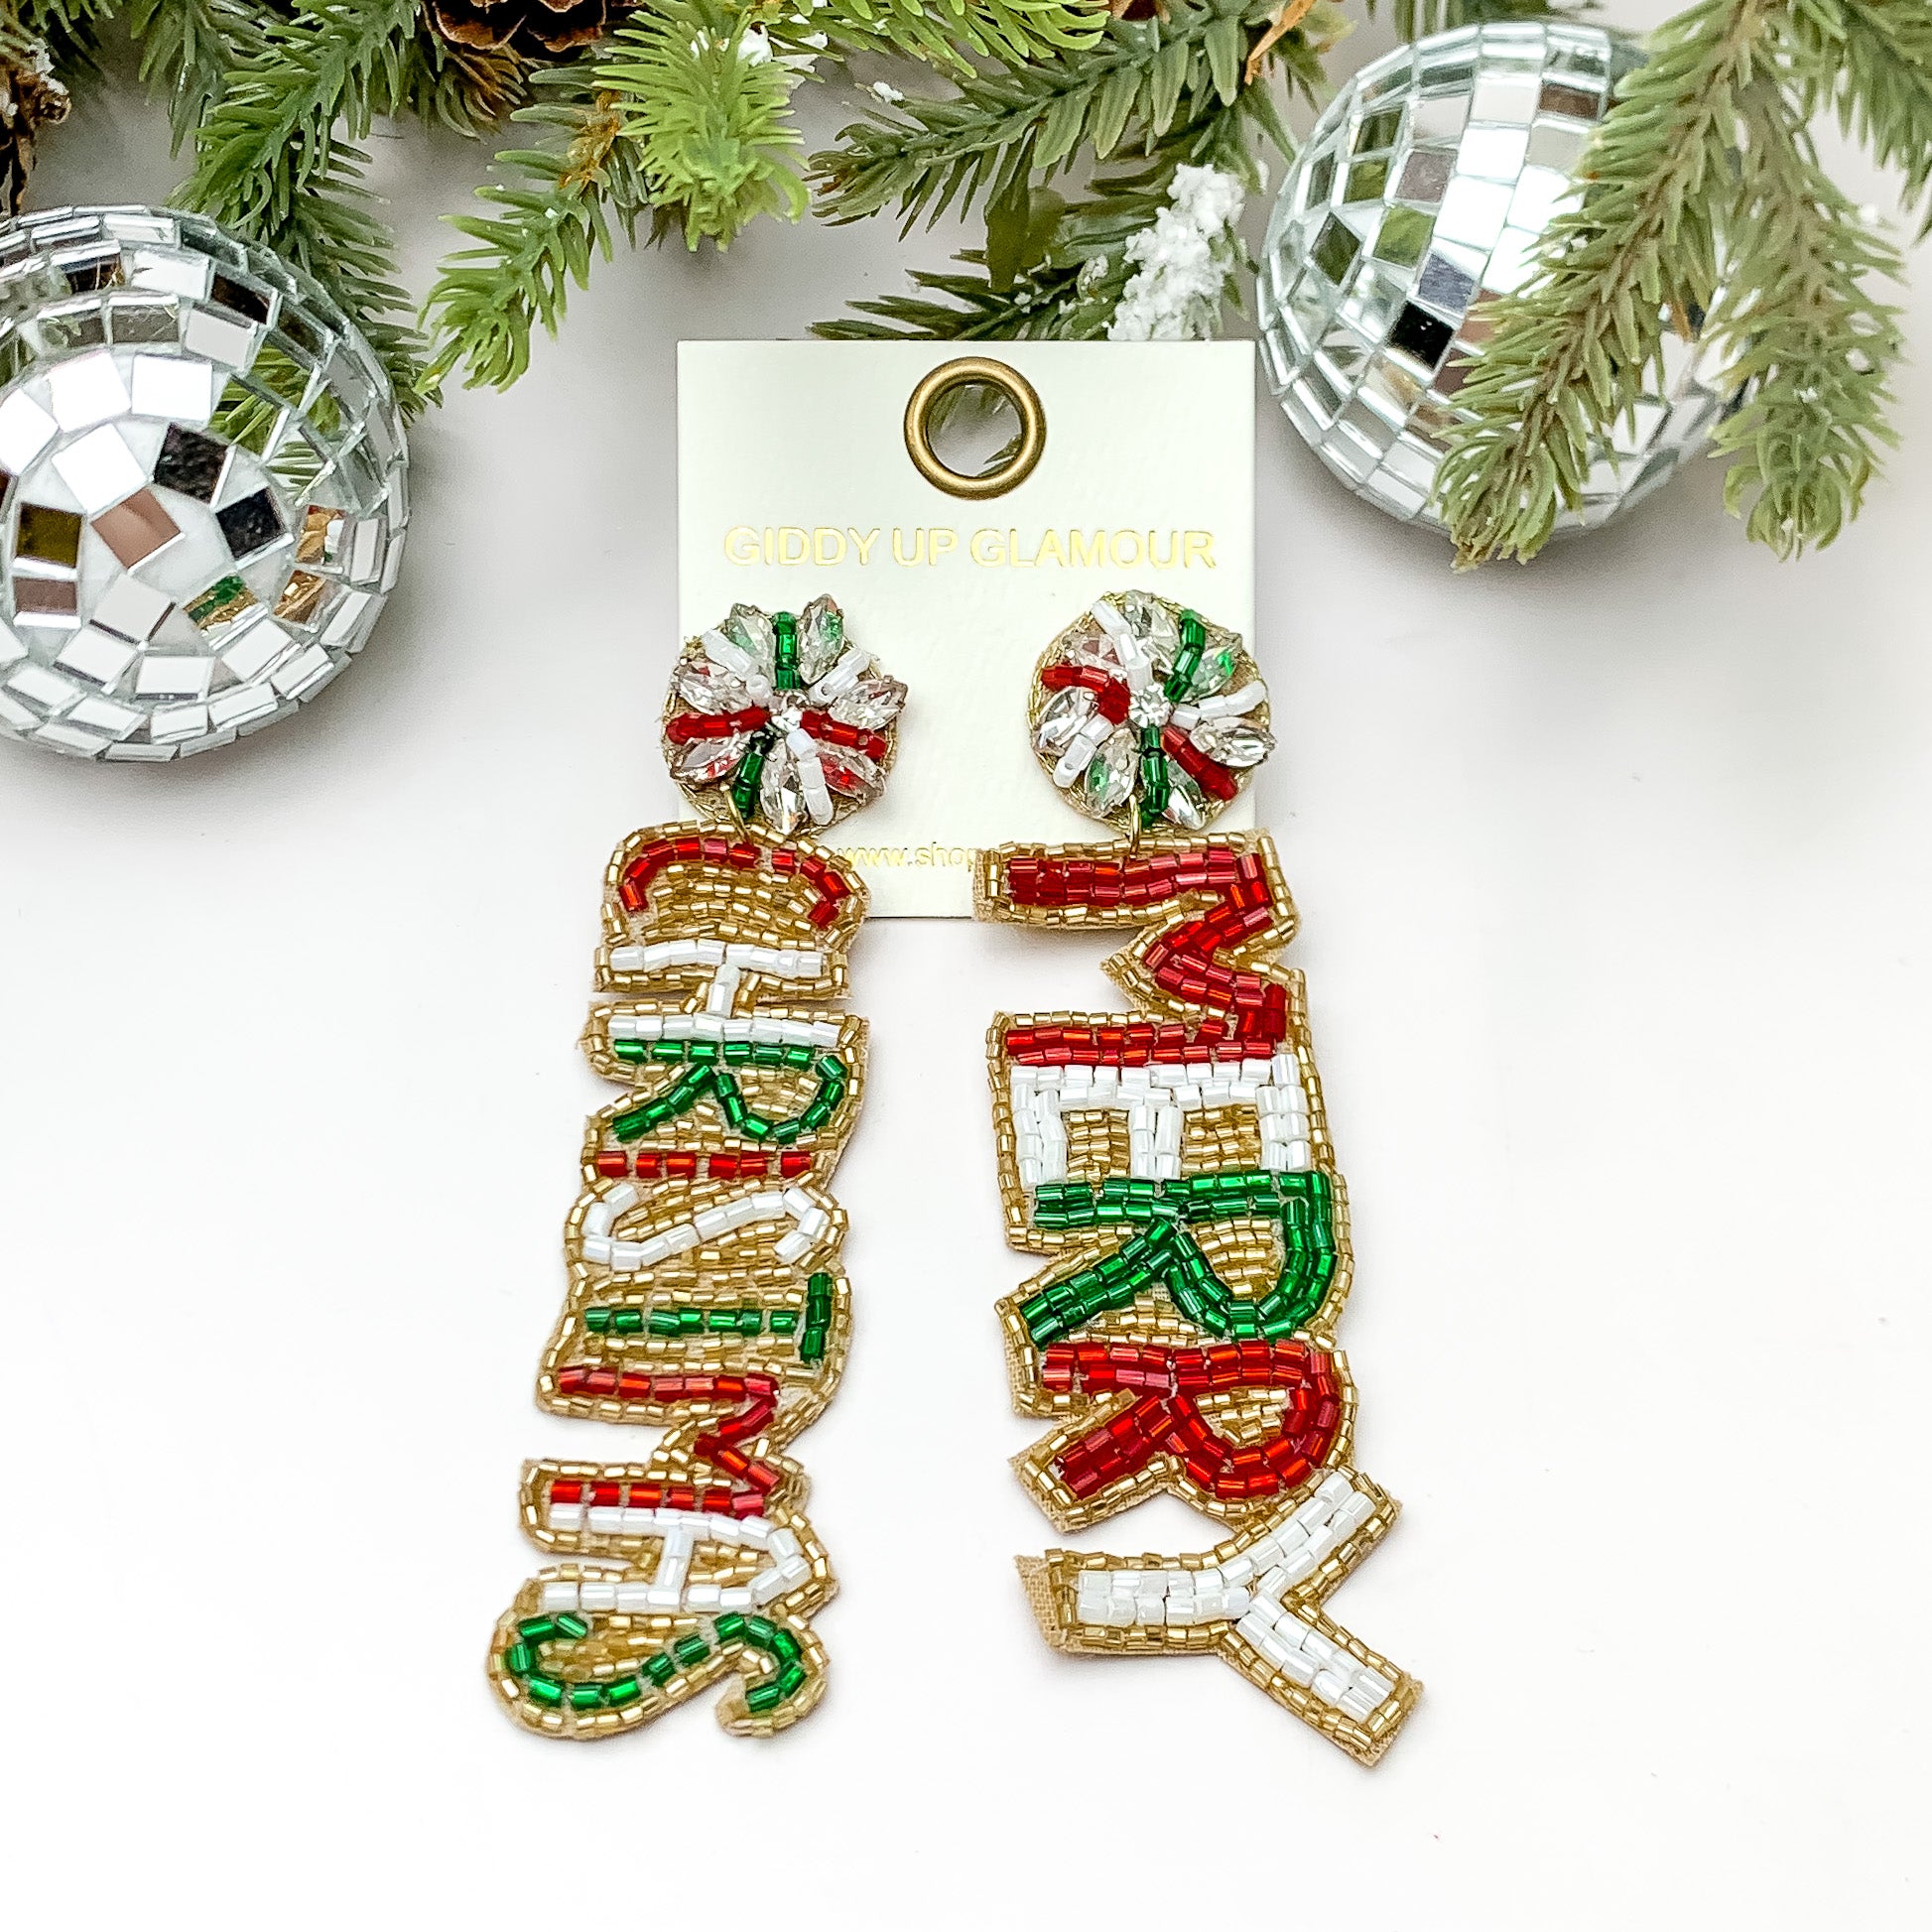 MERRY CHRISTMAS Beaded Drop Earrings in Red and Green - Giddy Up Glamour Boutique